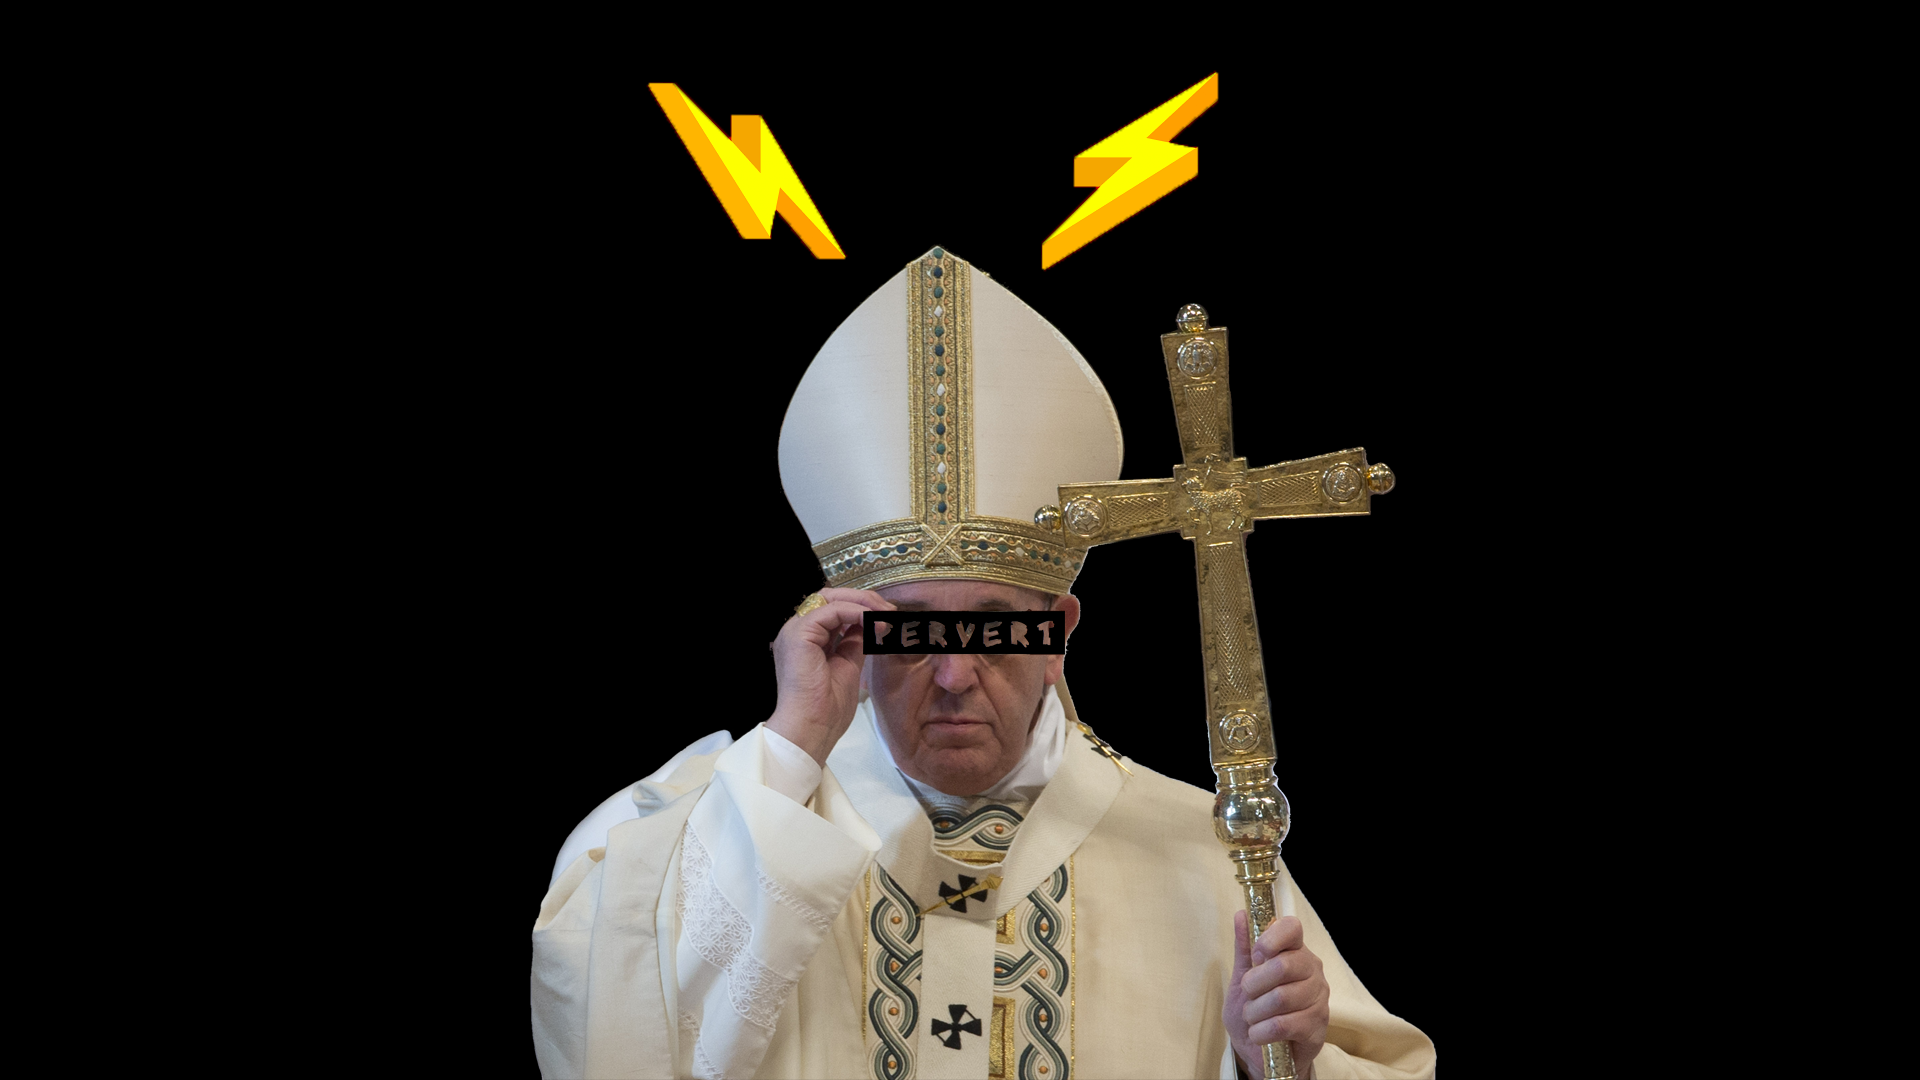 main priests popes